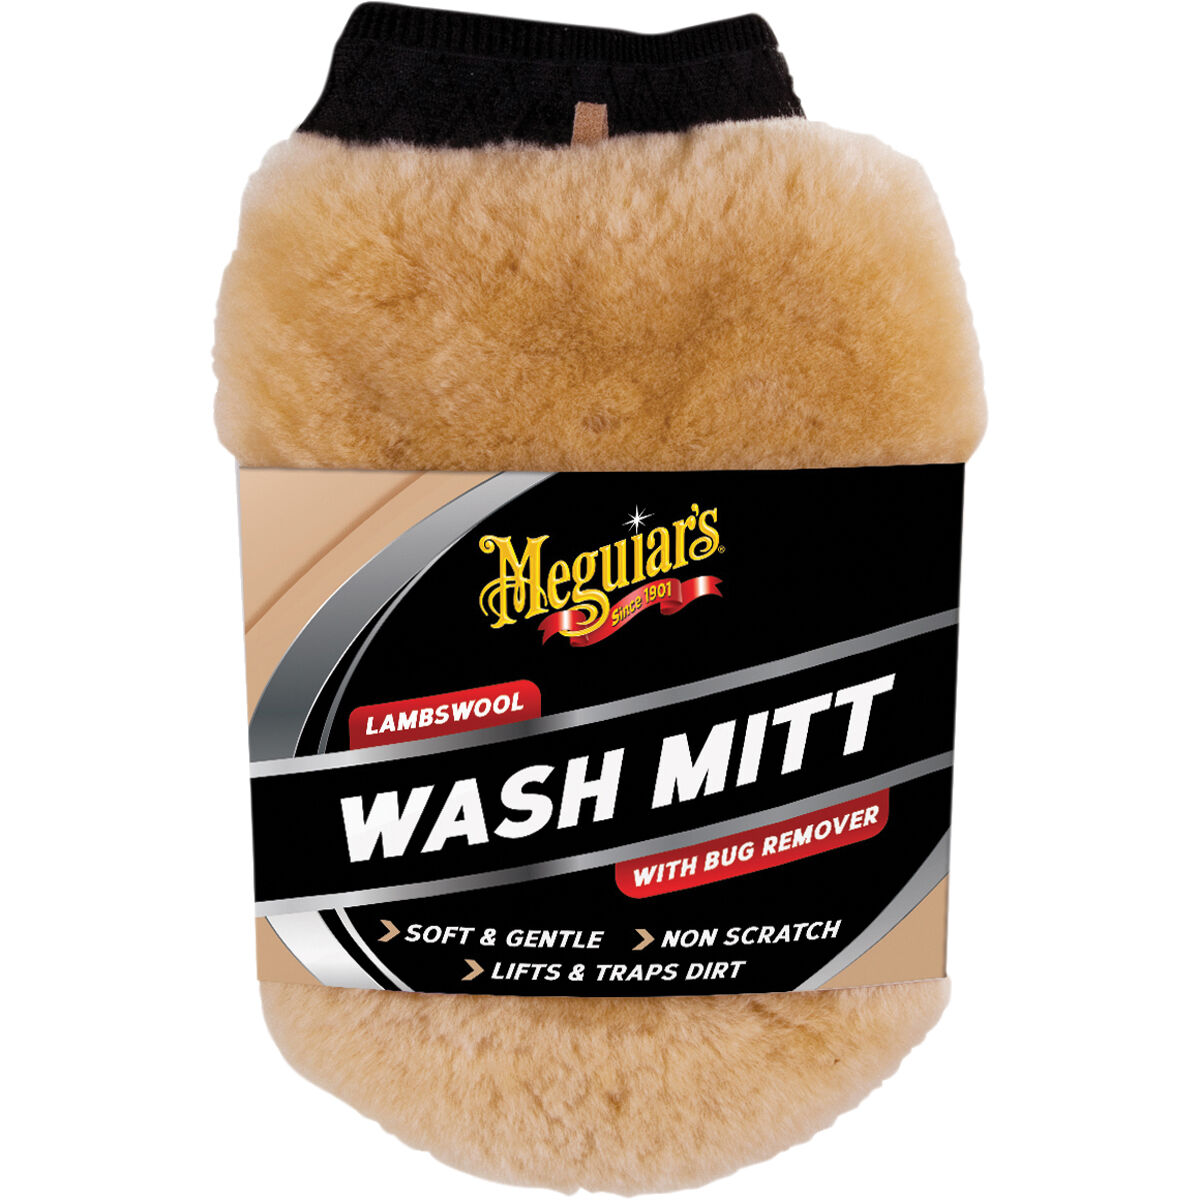 Super Soft & Highly Absorbent for Scratch Free Cleaning Lambs Wool Car Wash Mitt 